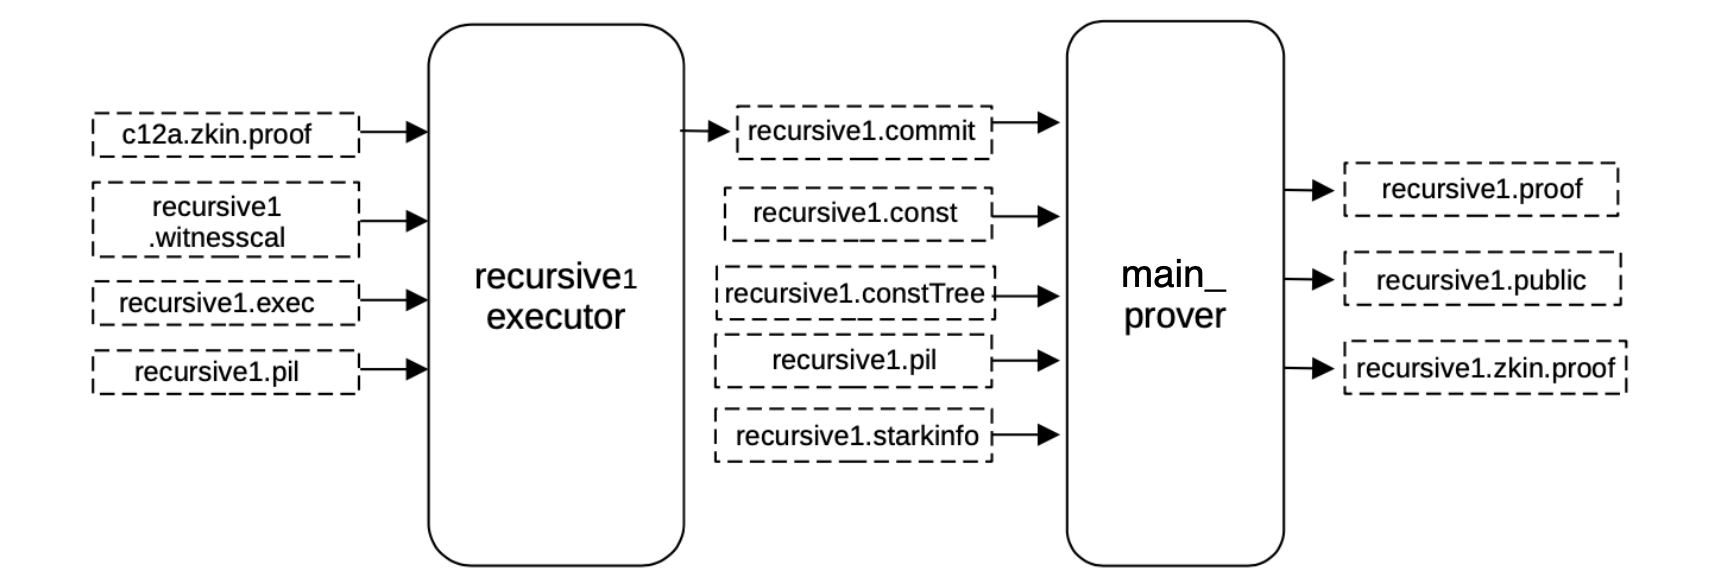 Generate a STARK proof for recursive1.